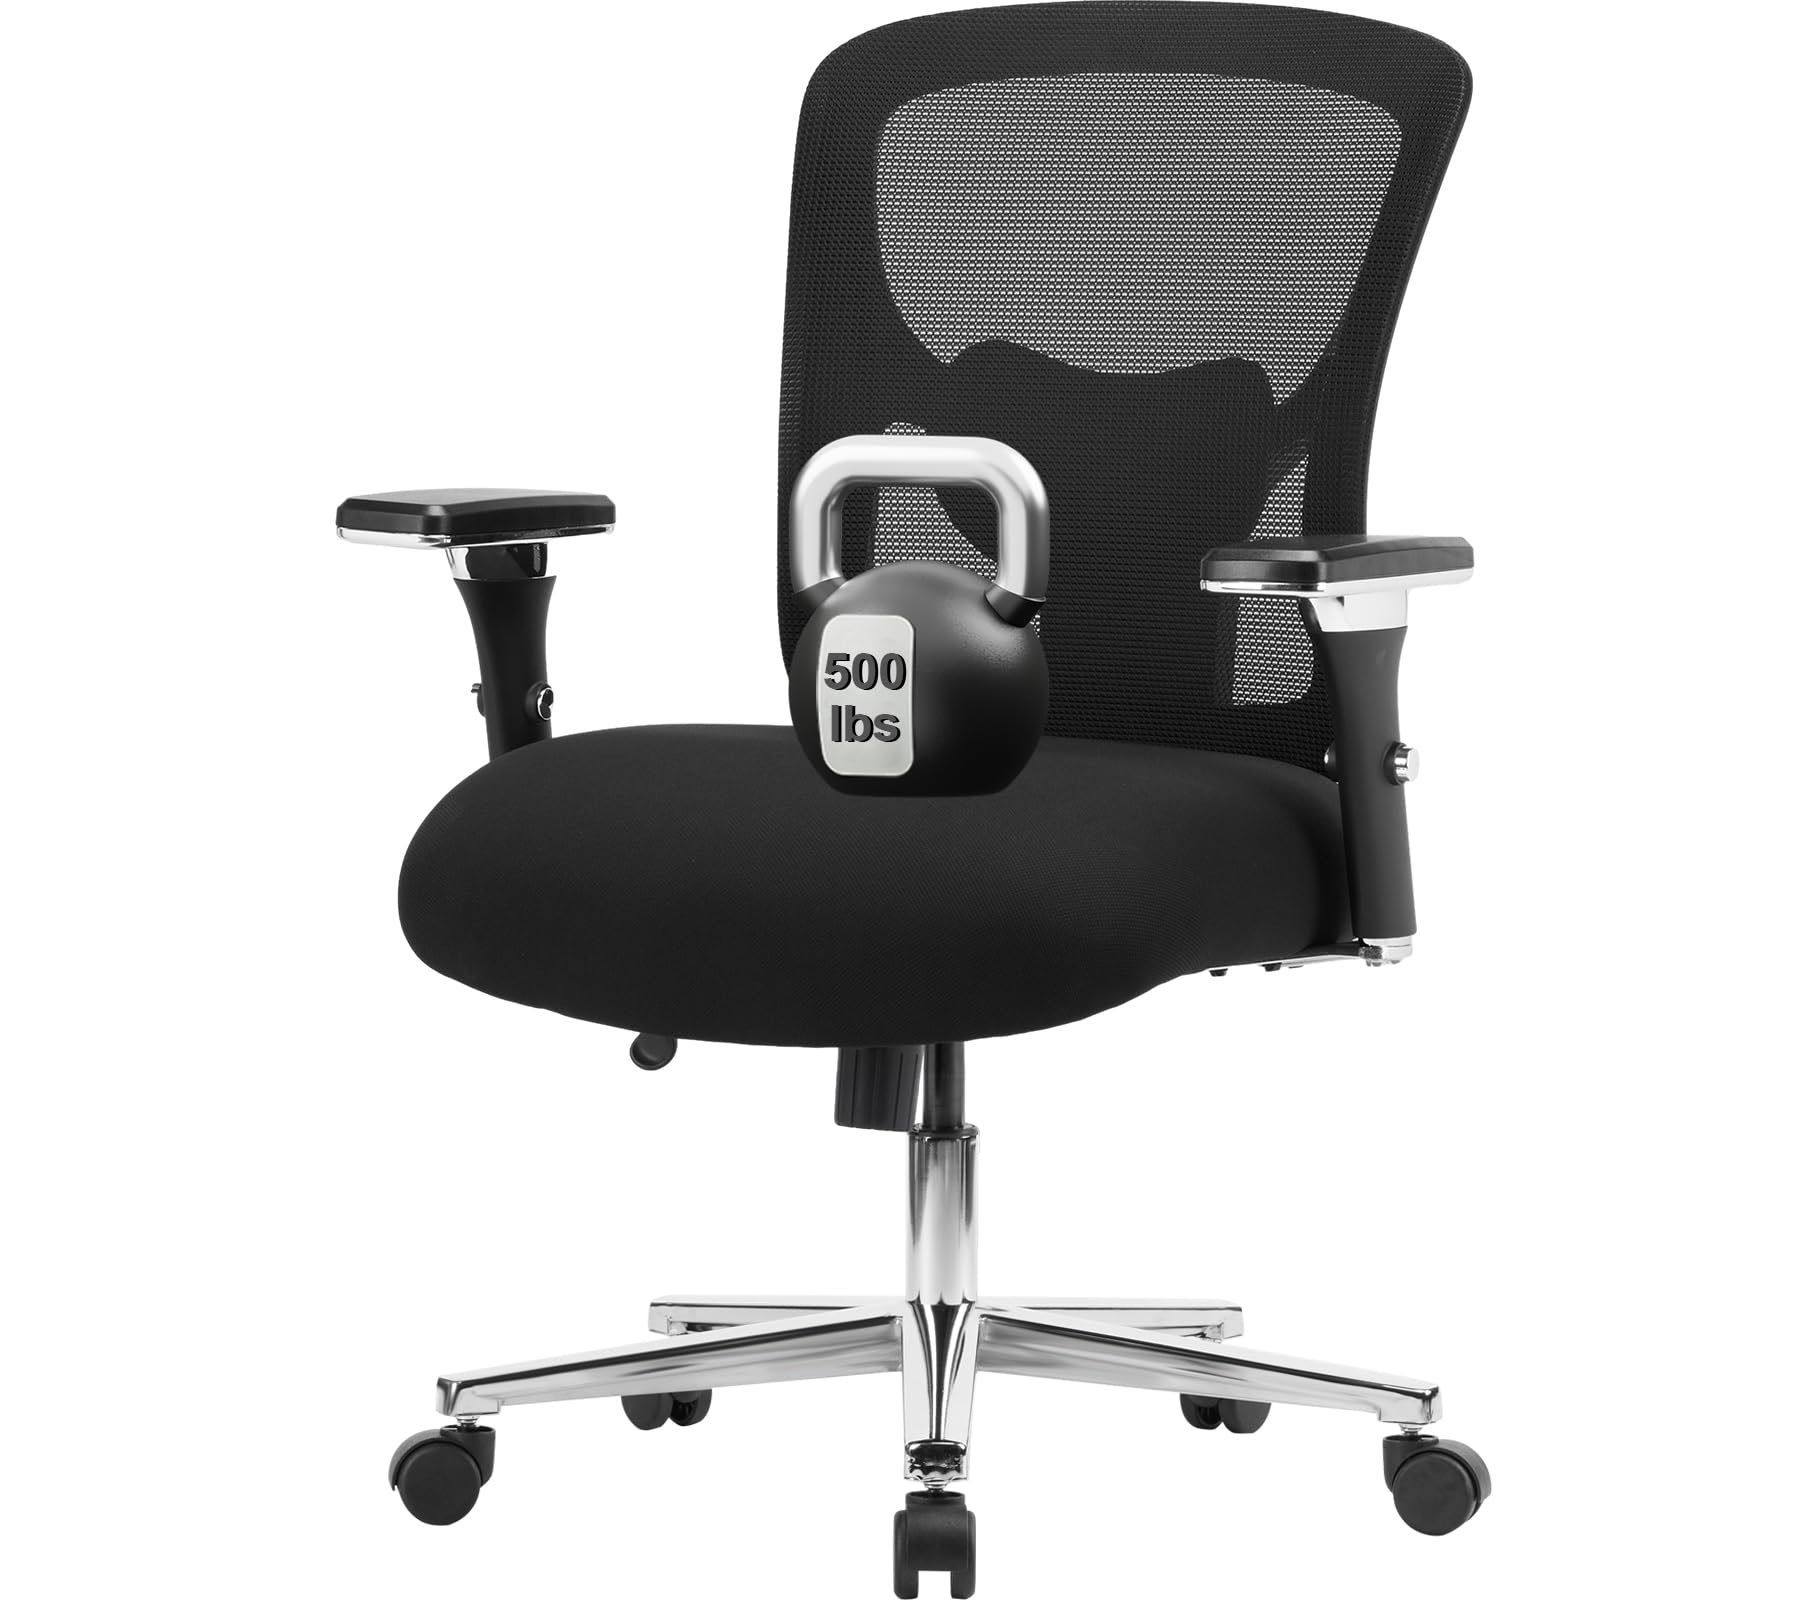 Find Comfort at Work: The Best Ergonomic Office Chairs for Your Workspace